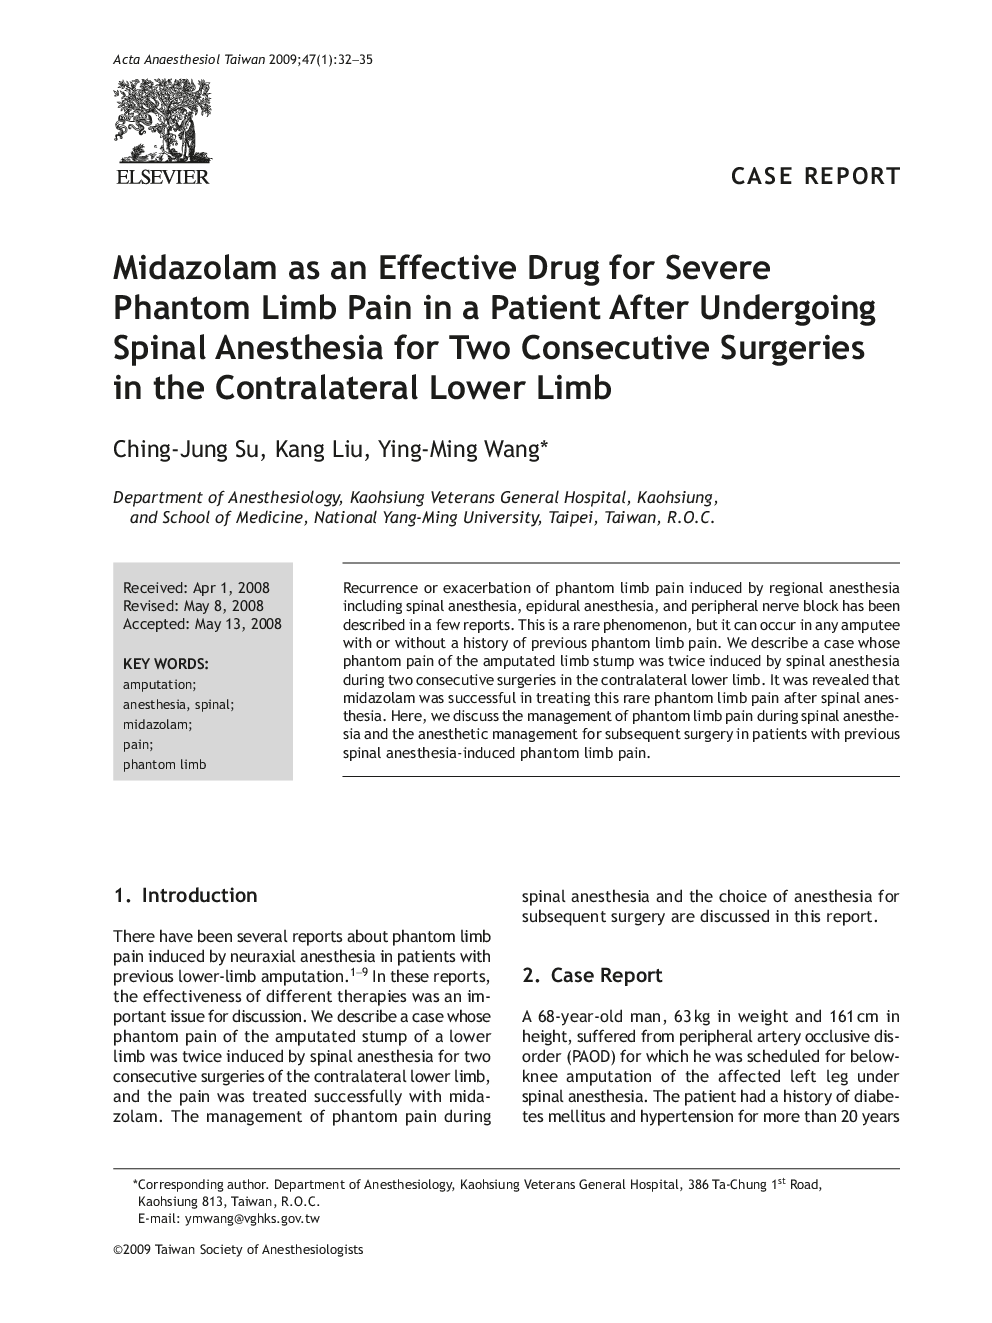 Midazolam as an Effective Drug for Severe Phantom Limb Pain in a Patient After Undergoing Spinal Anesthesia for Two Consecutive Surgeries in the Contralateral Lower Limb